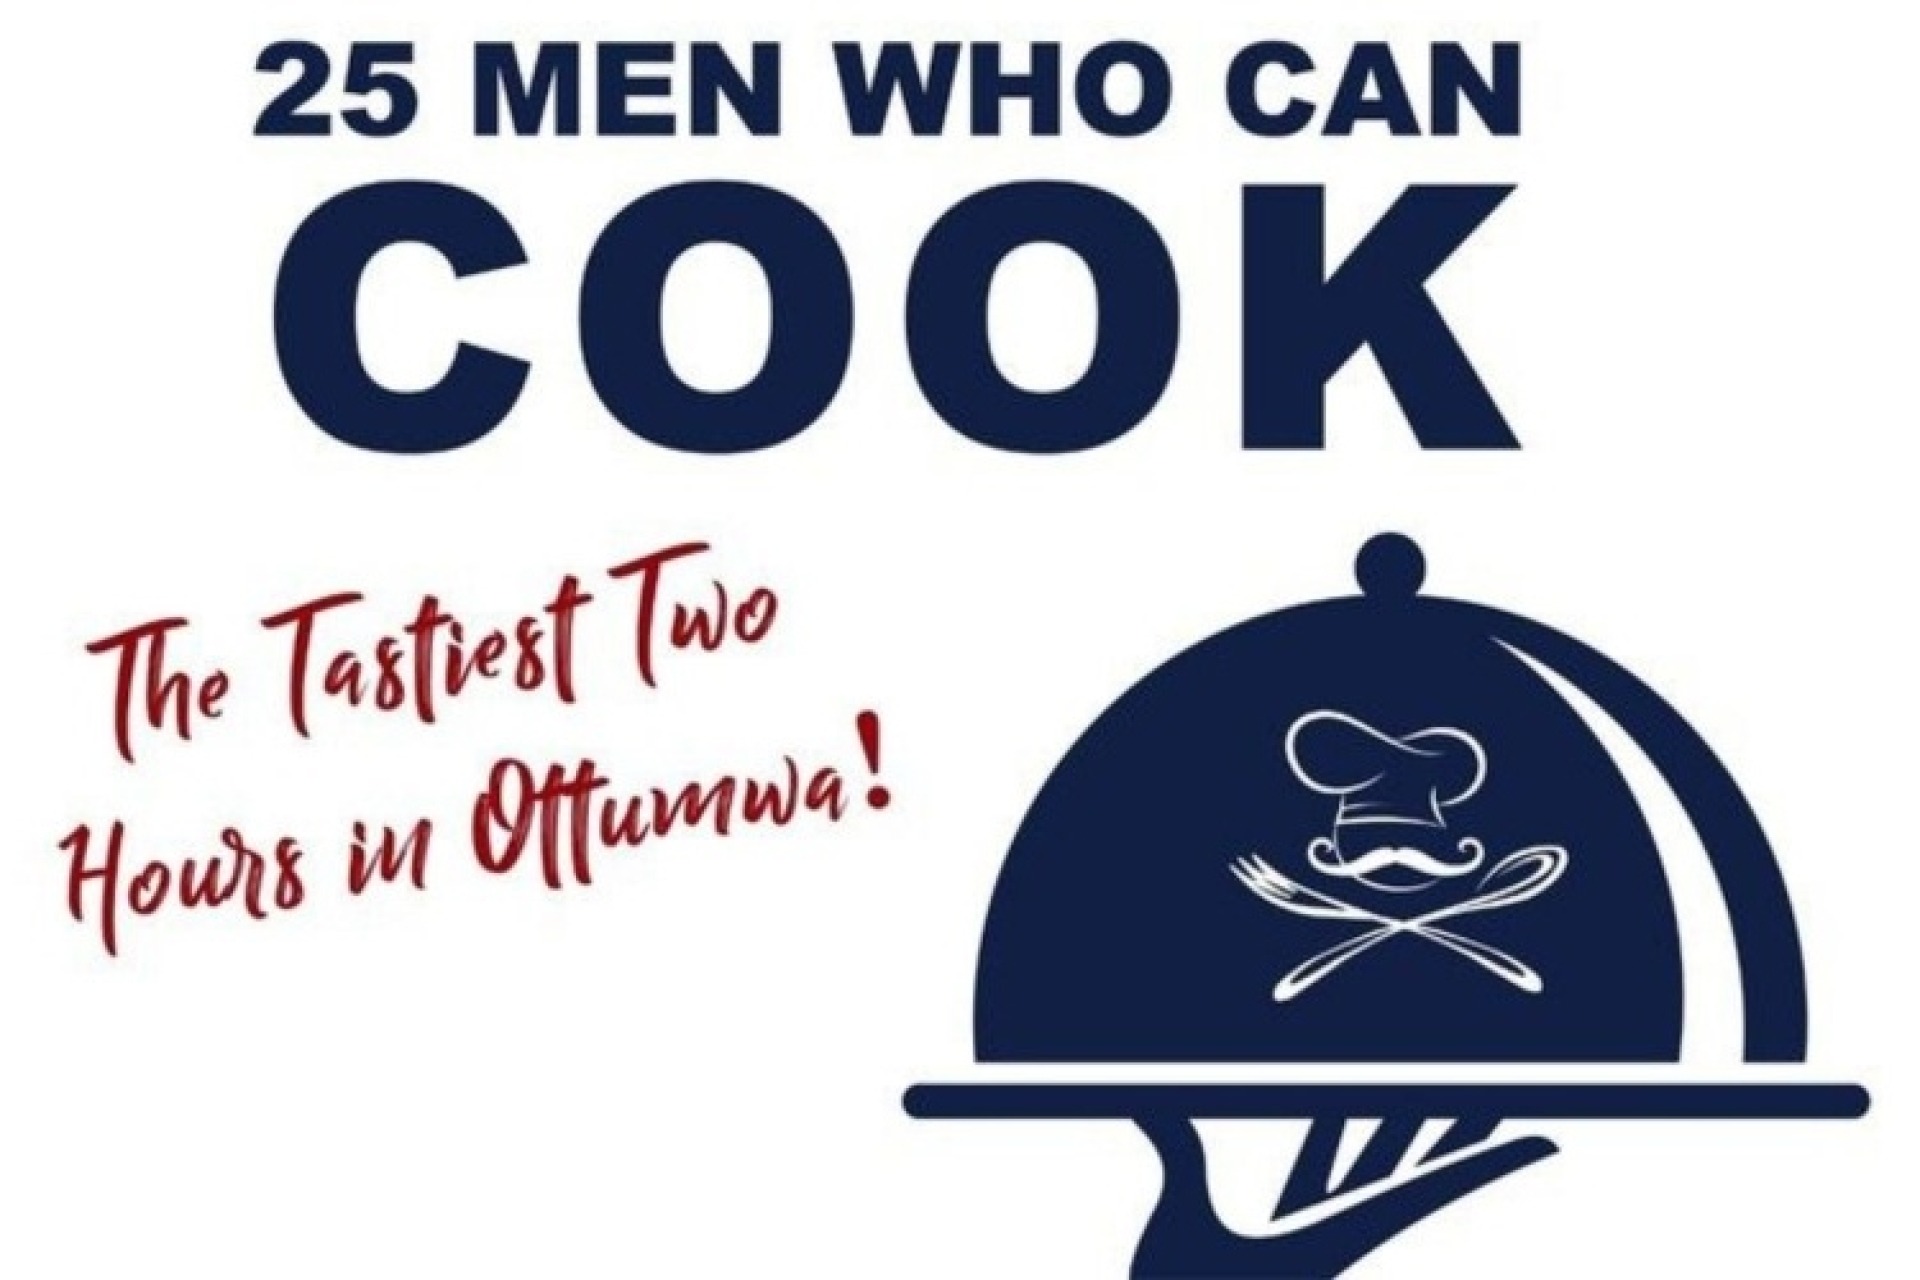 25 Men Who Can Cook